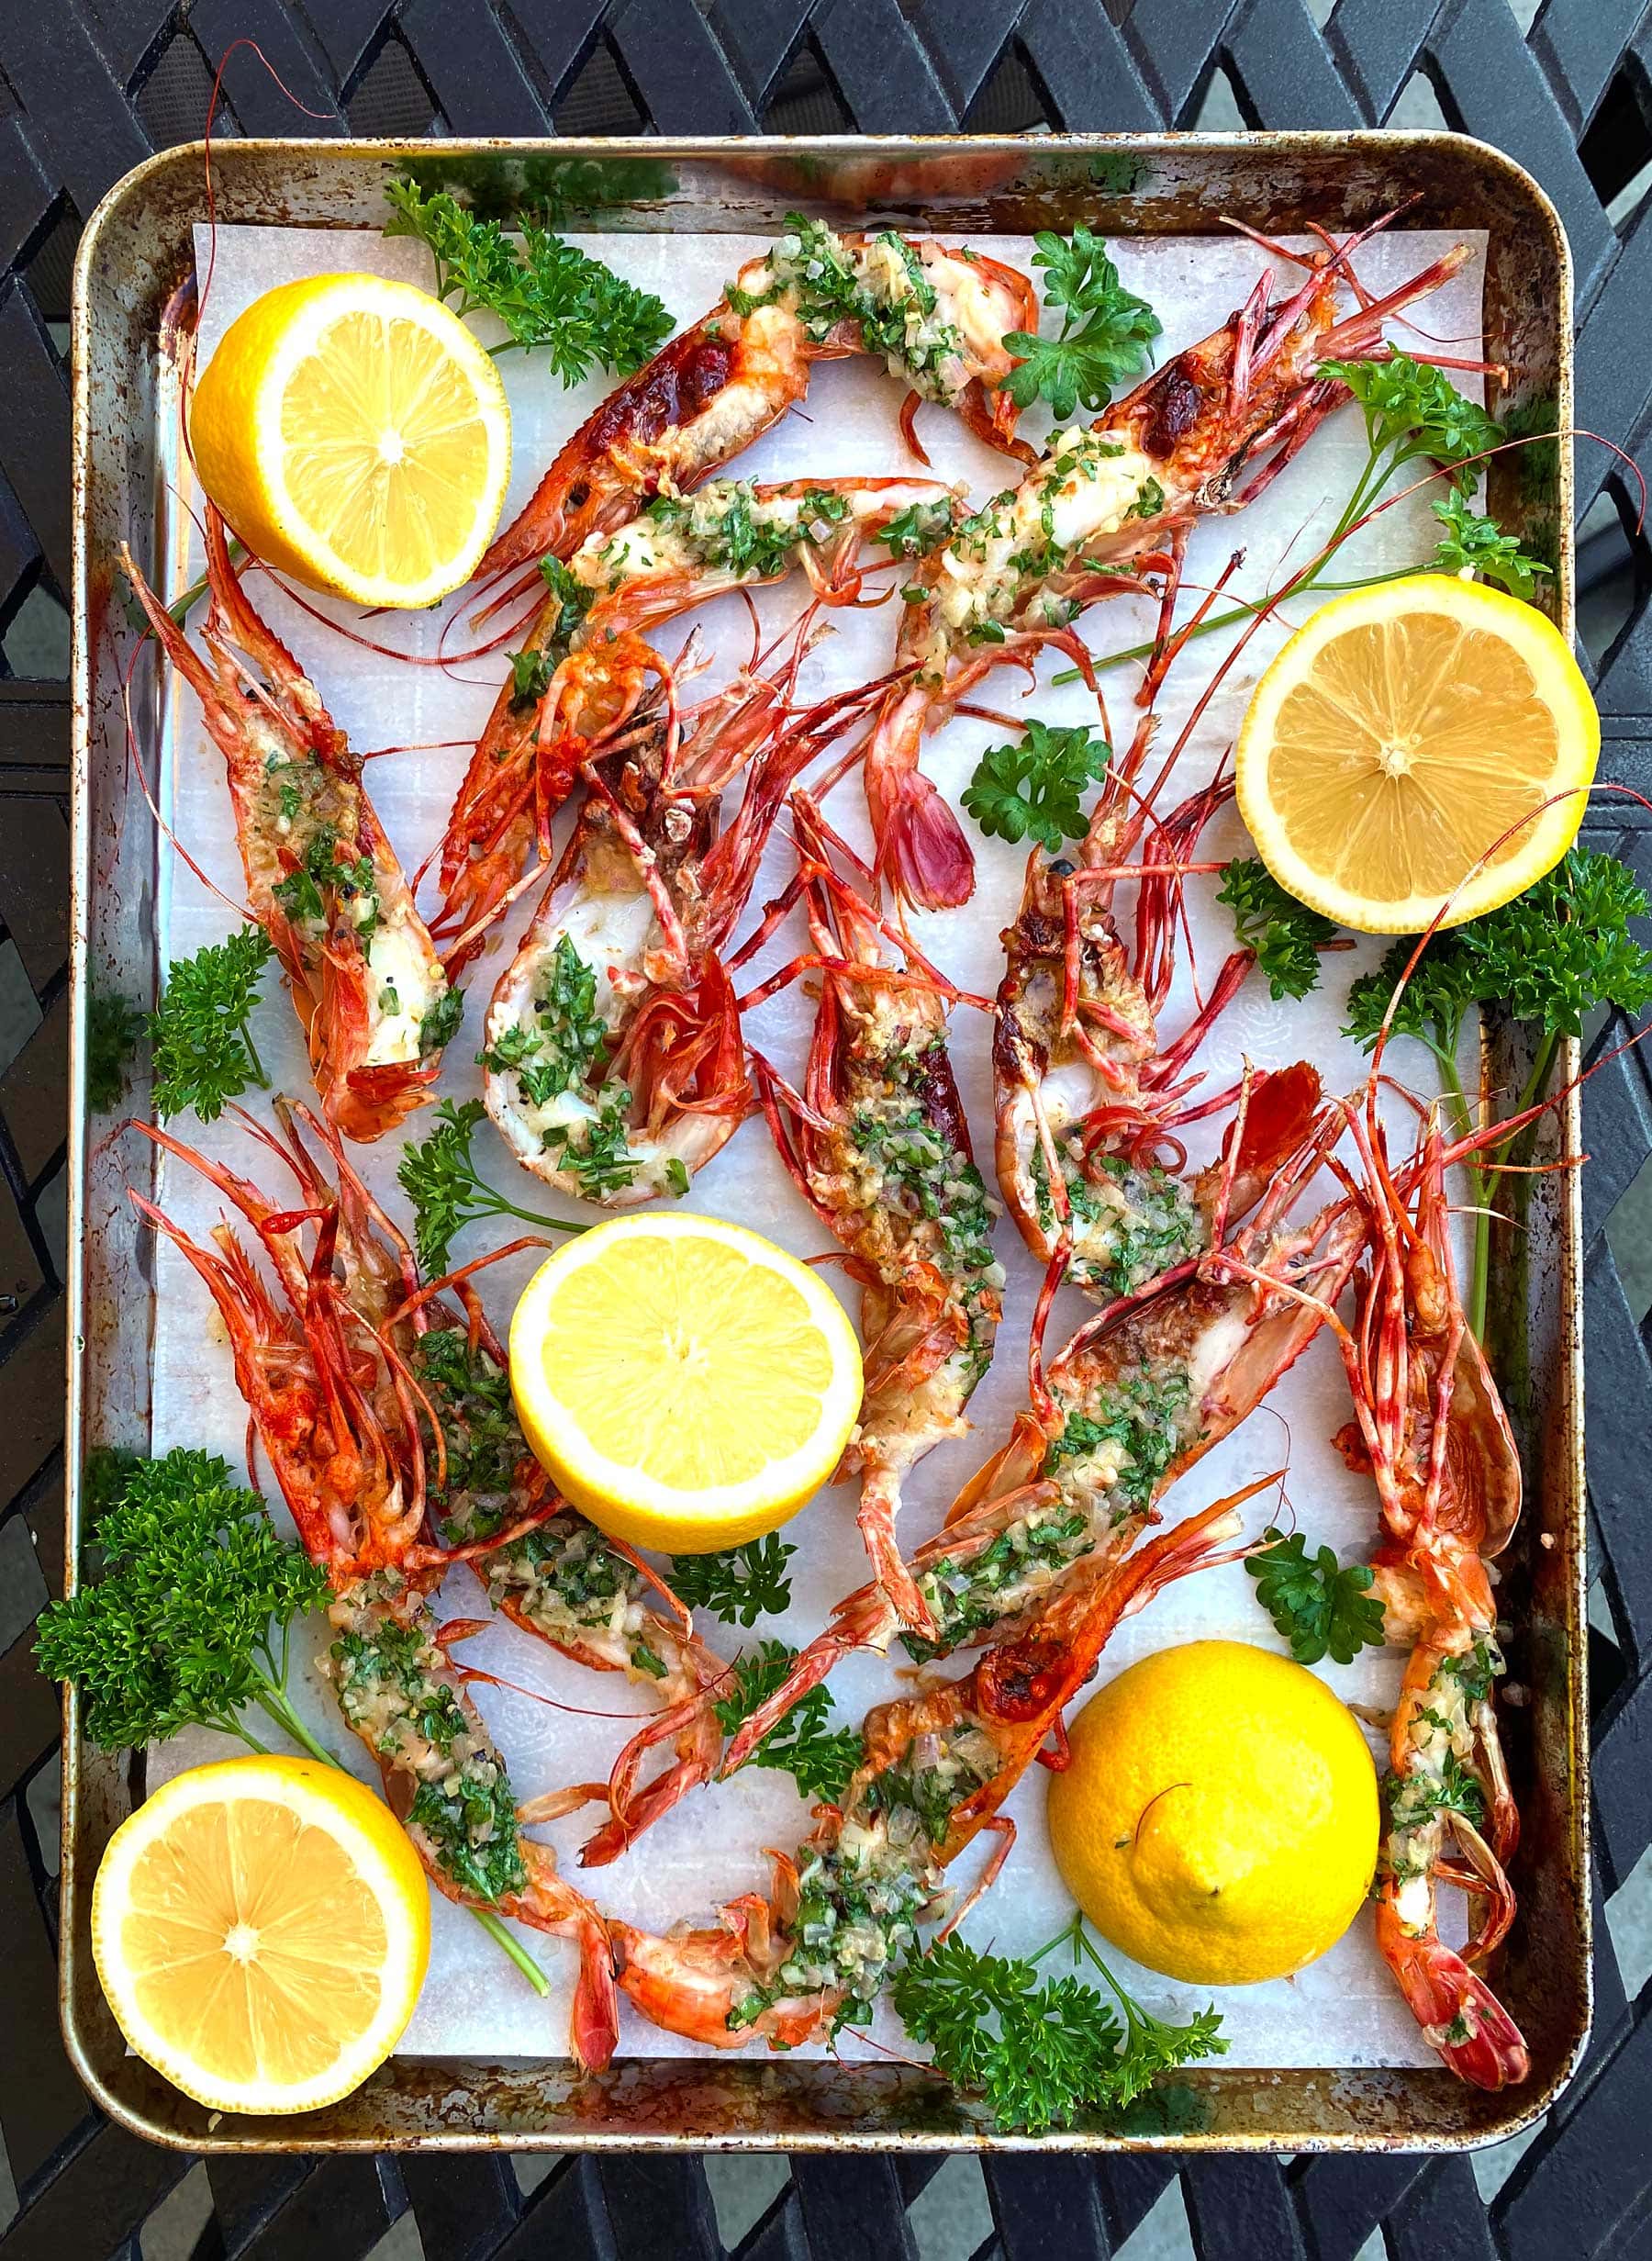 Grilled Spot Prawns with Garlic Herb Butter on a baking pan